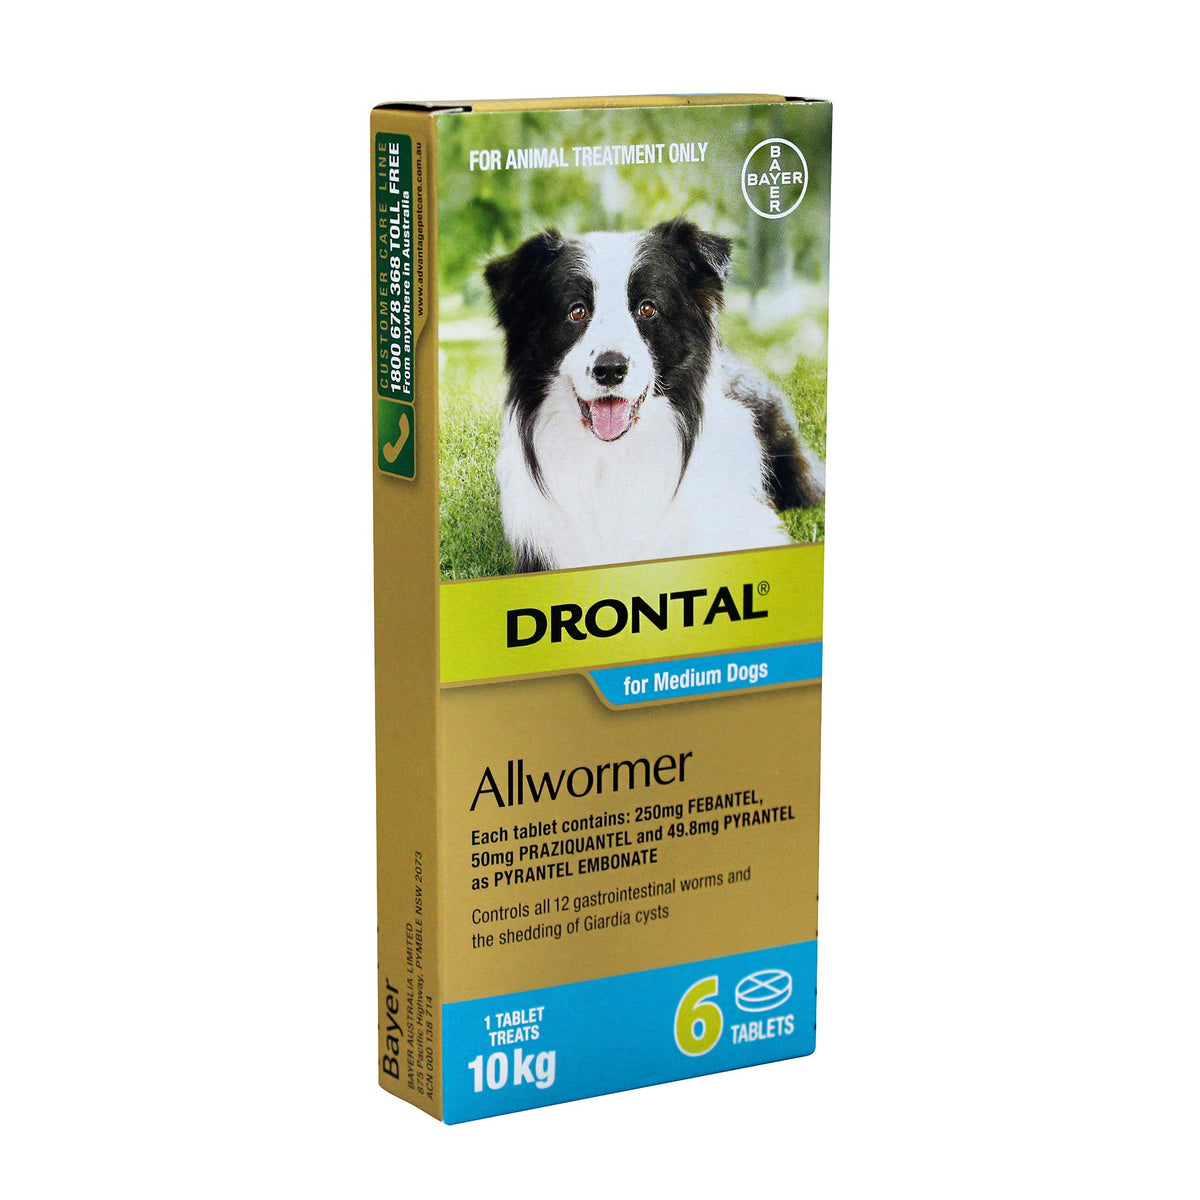 Drontal Allwormer Tablets for Medium Dogs - 6 Tablets